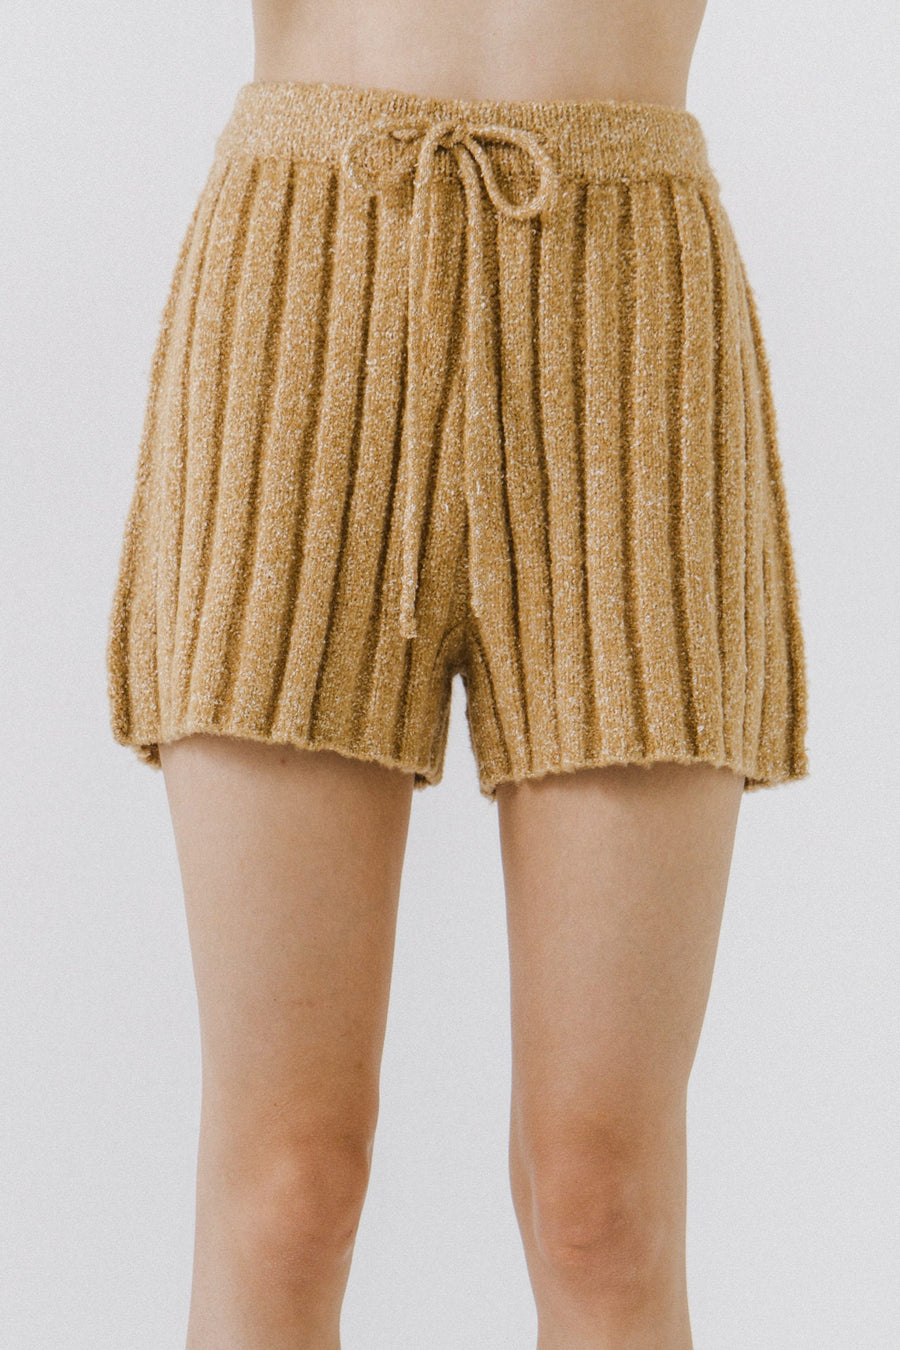 FREE THE ROSES-Knit Shorts-SHORTS available at Objectrare